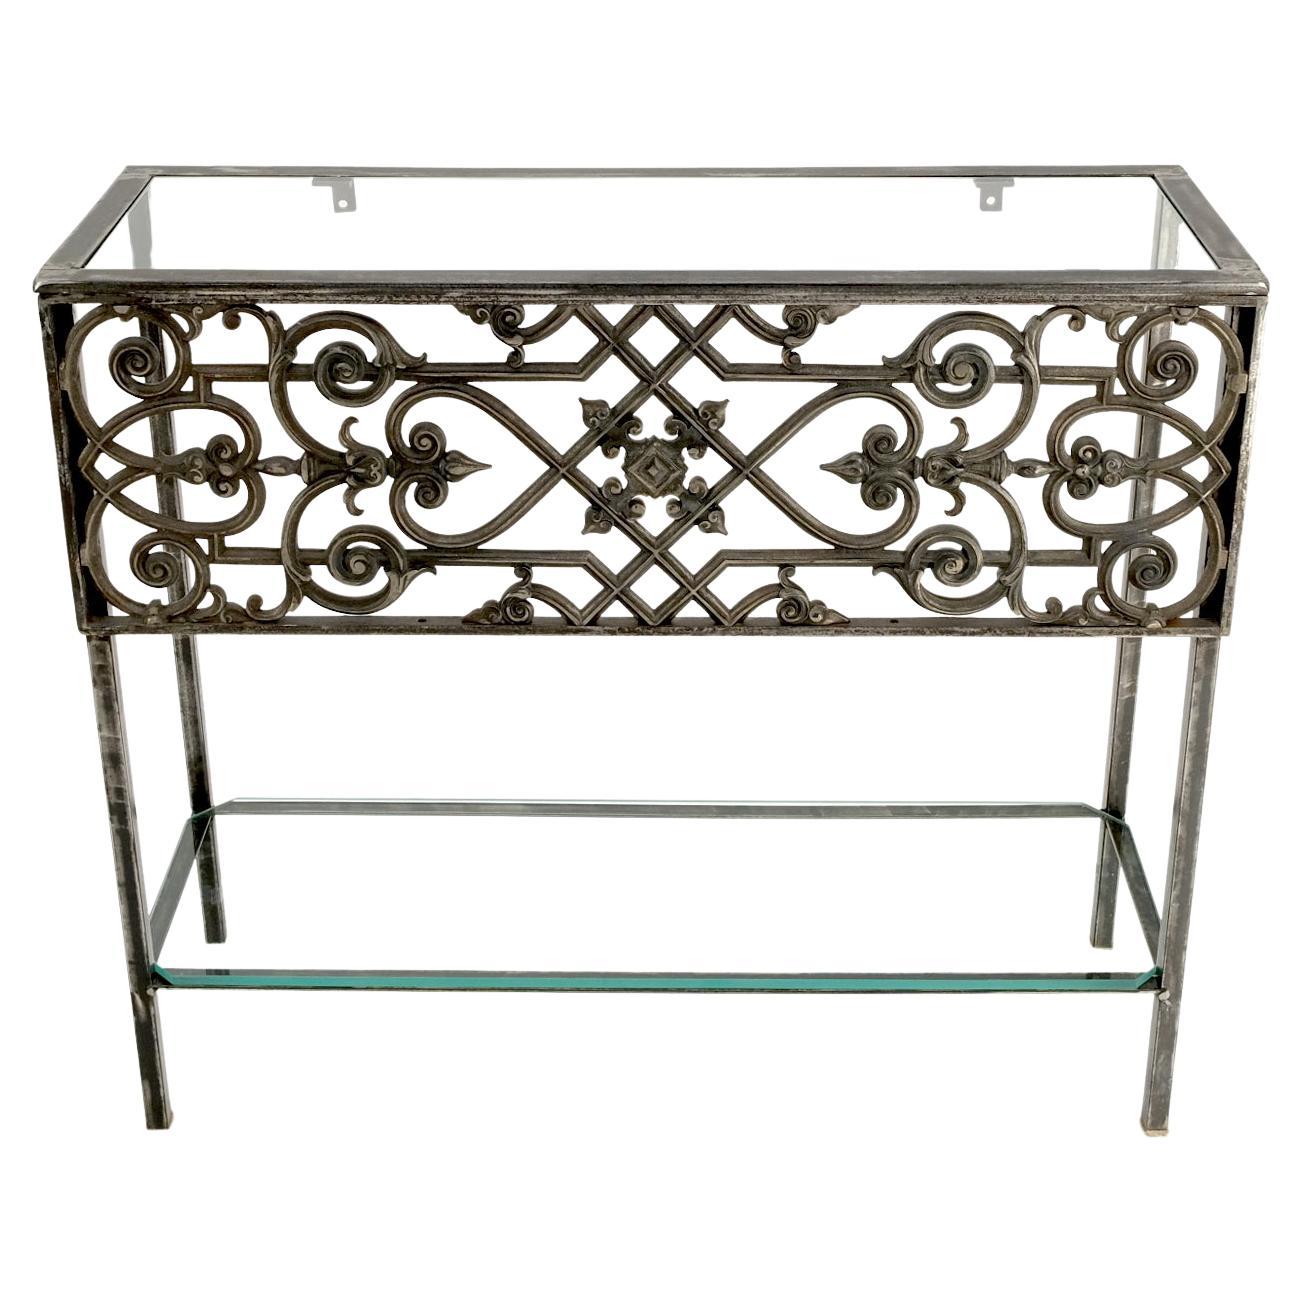 Polished Cast Iron Ornament 2 Tier Glass Top Lower Shelf Console Sofa Table For Sale